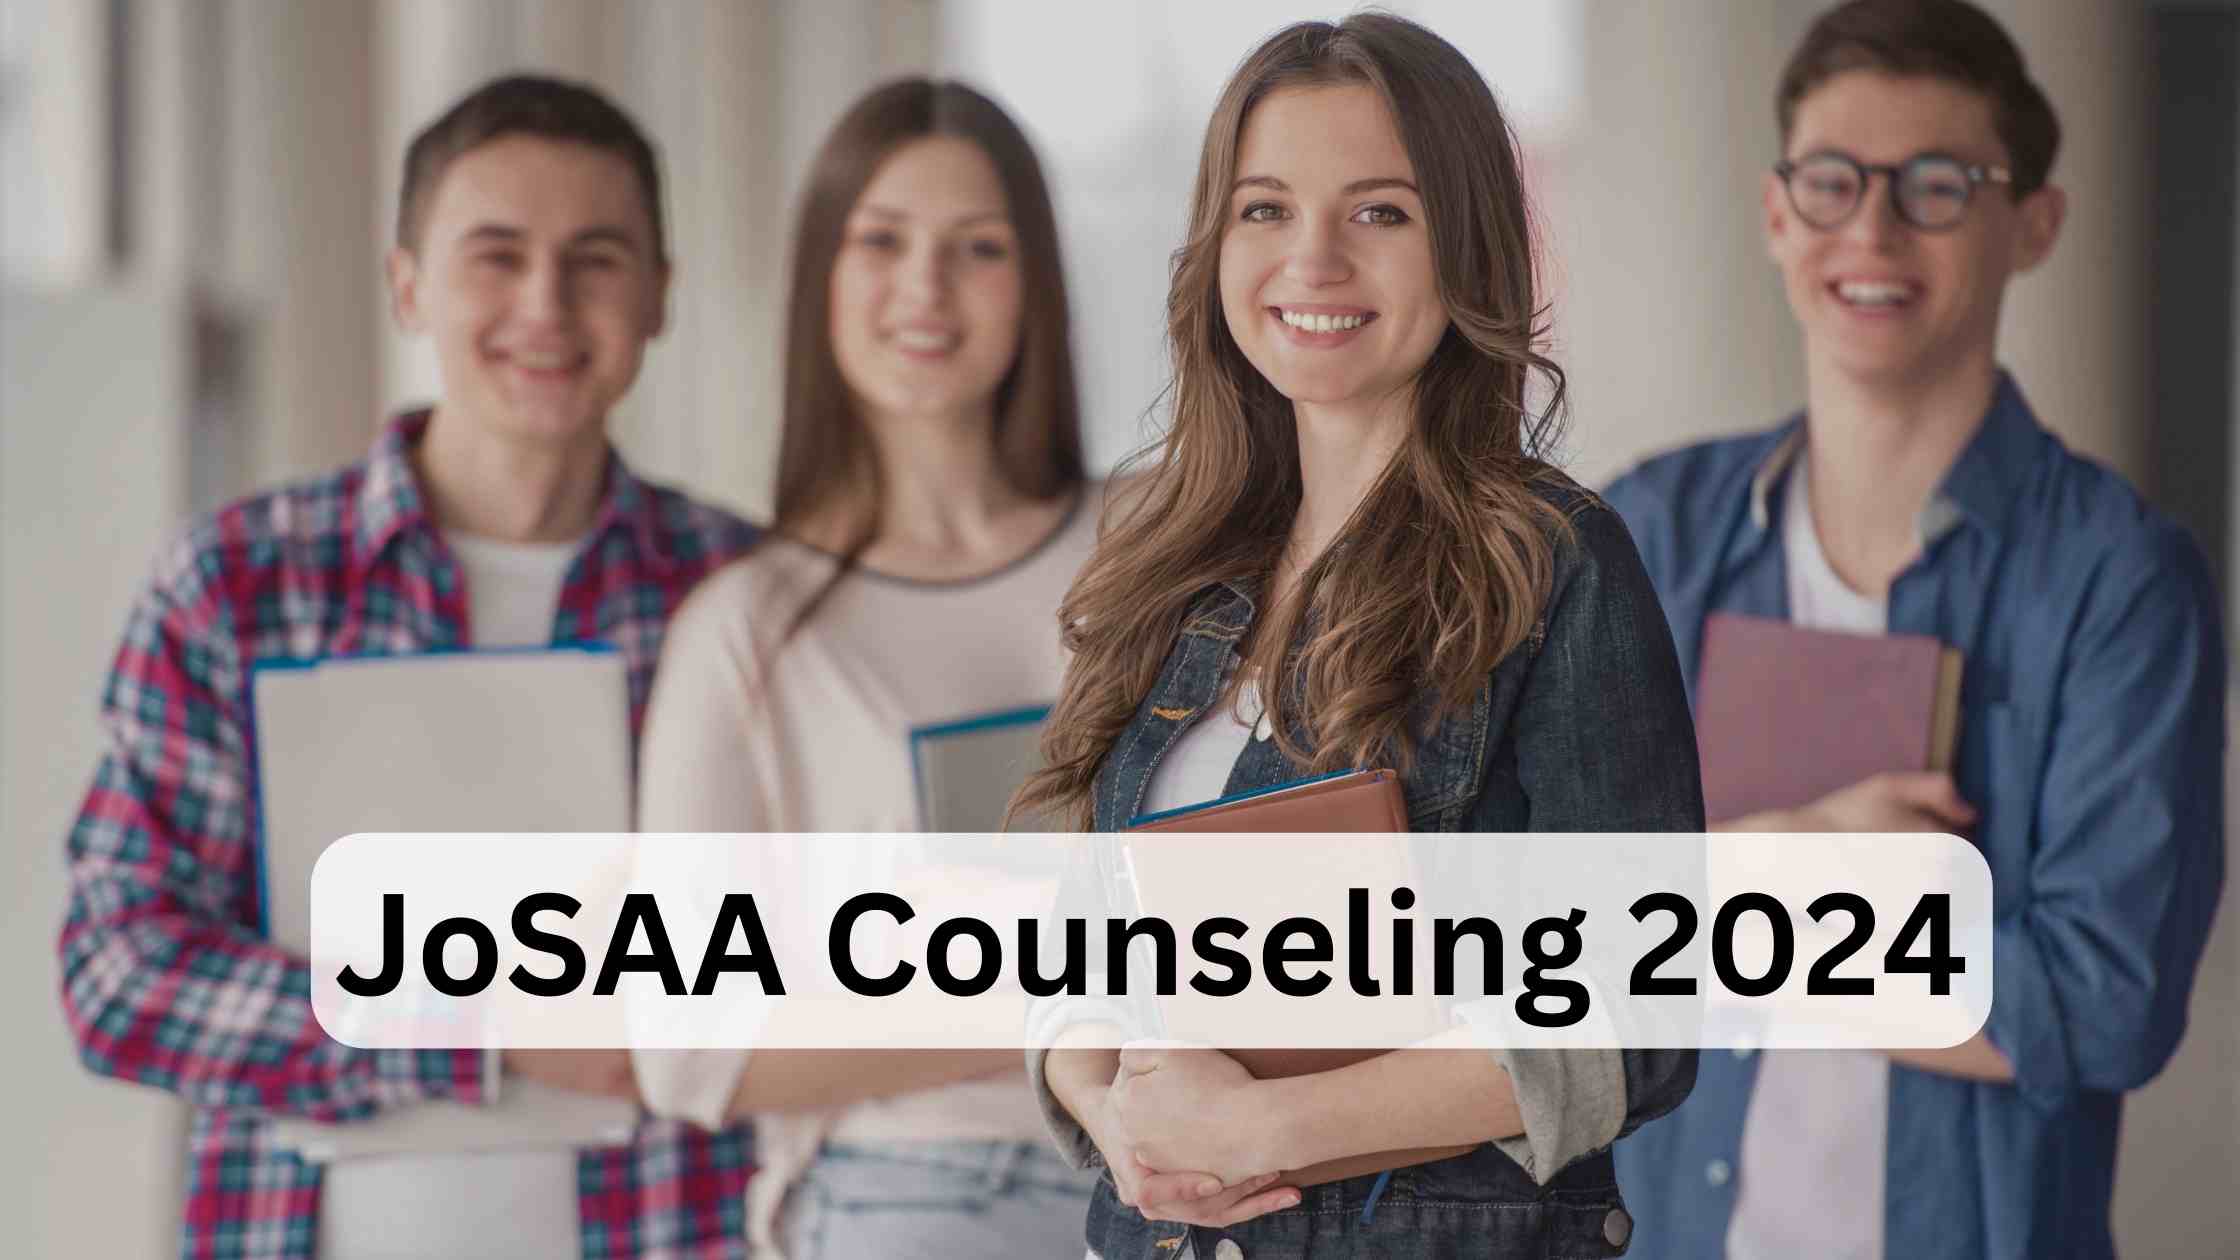 You are currently viewing JoSAA Counseling 2024: Counseling will start from this date, schedule released